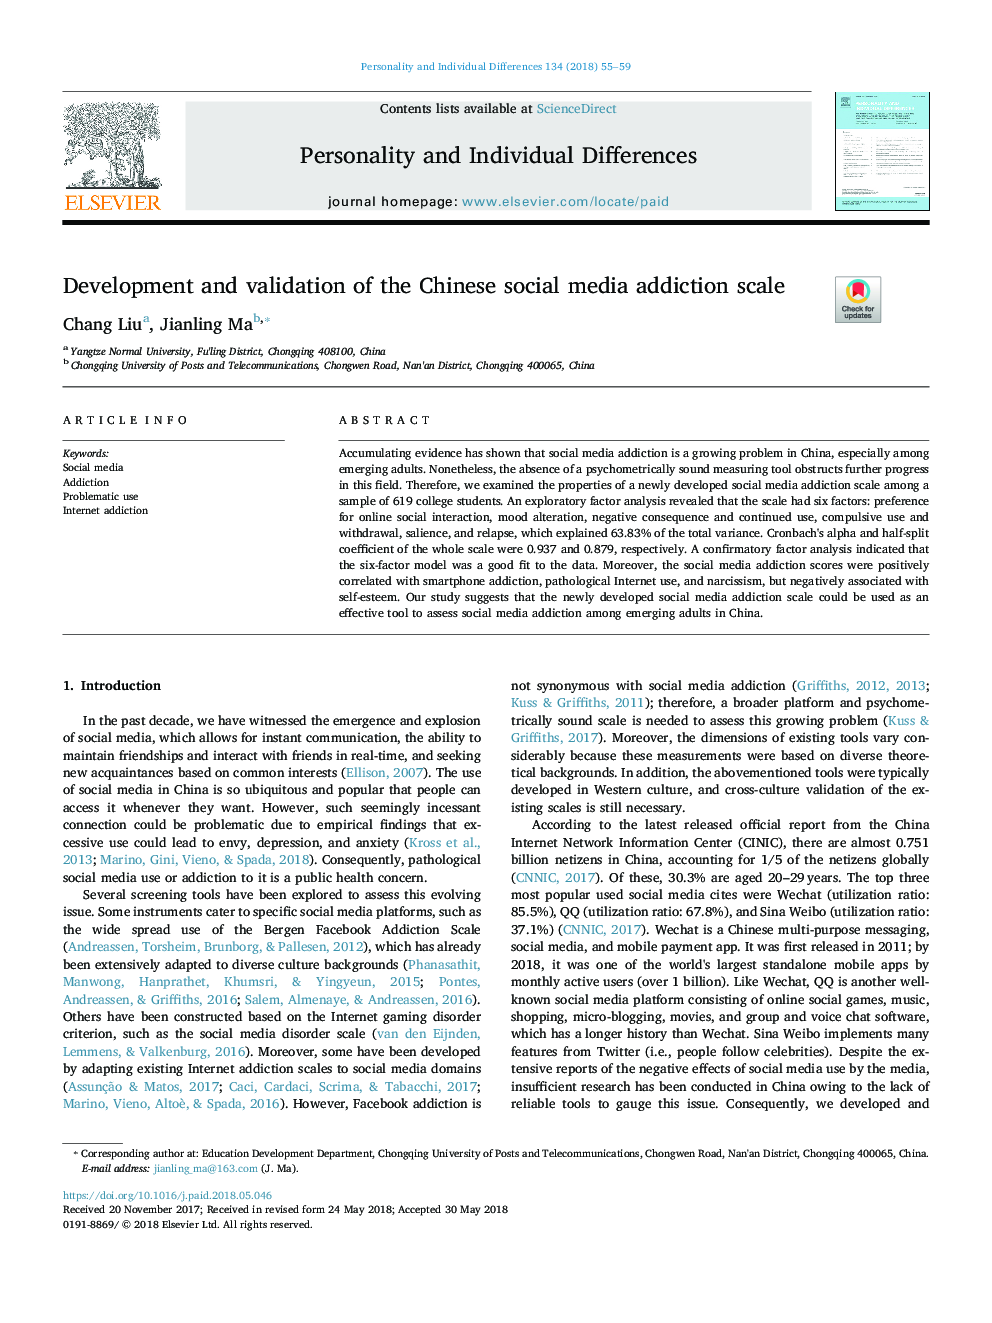 Development and validation of the Chinese social media addiction scale